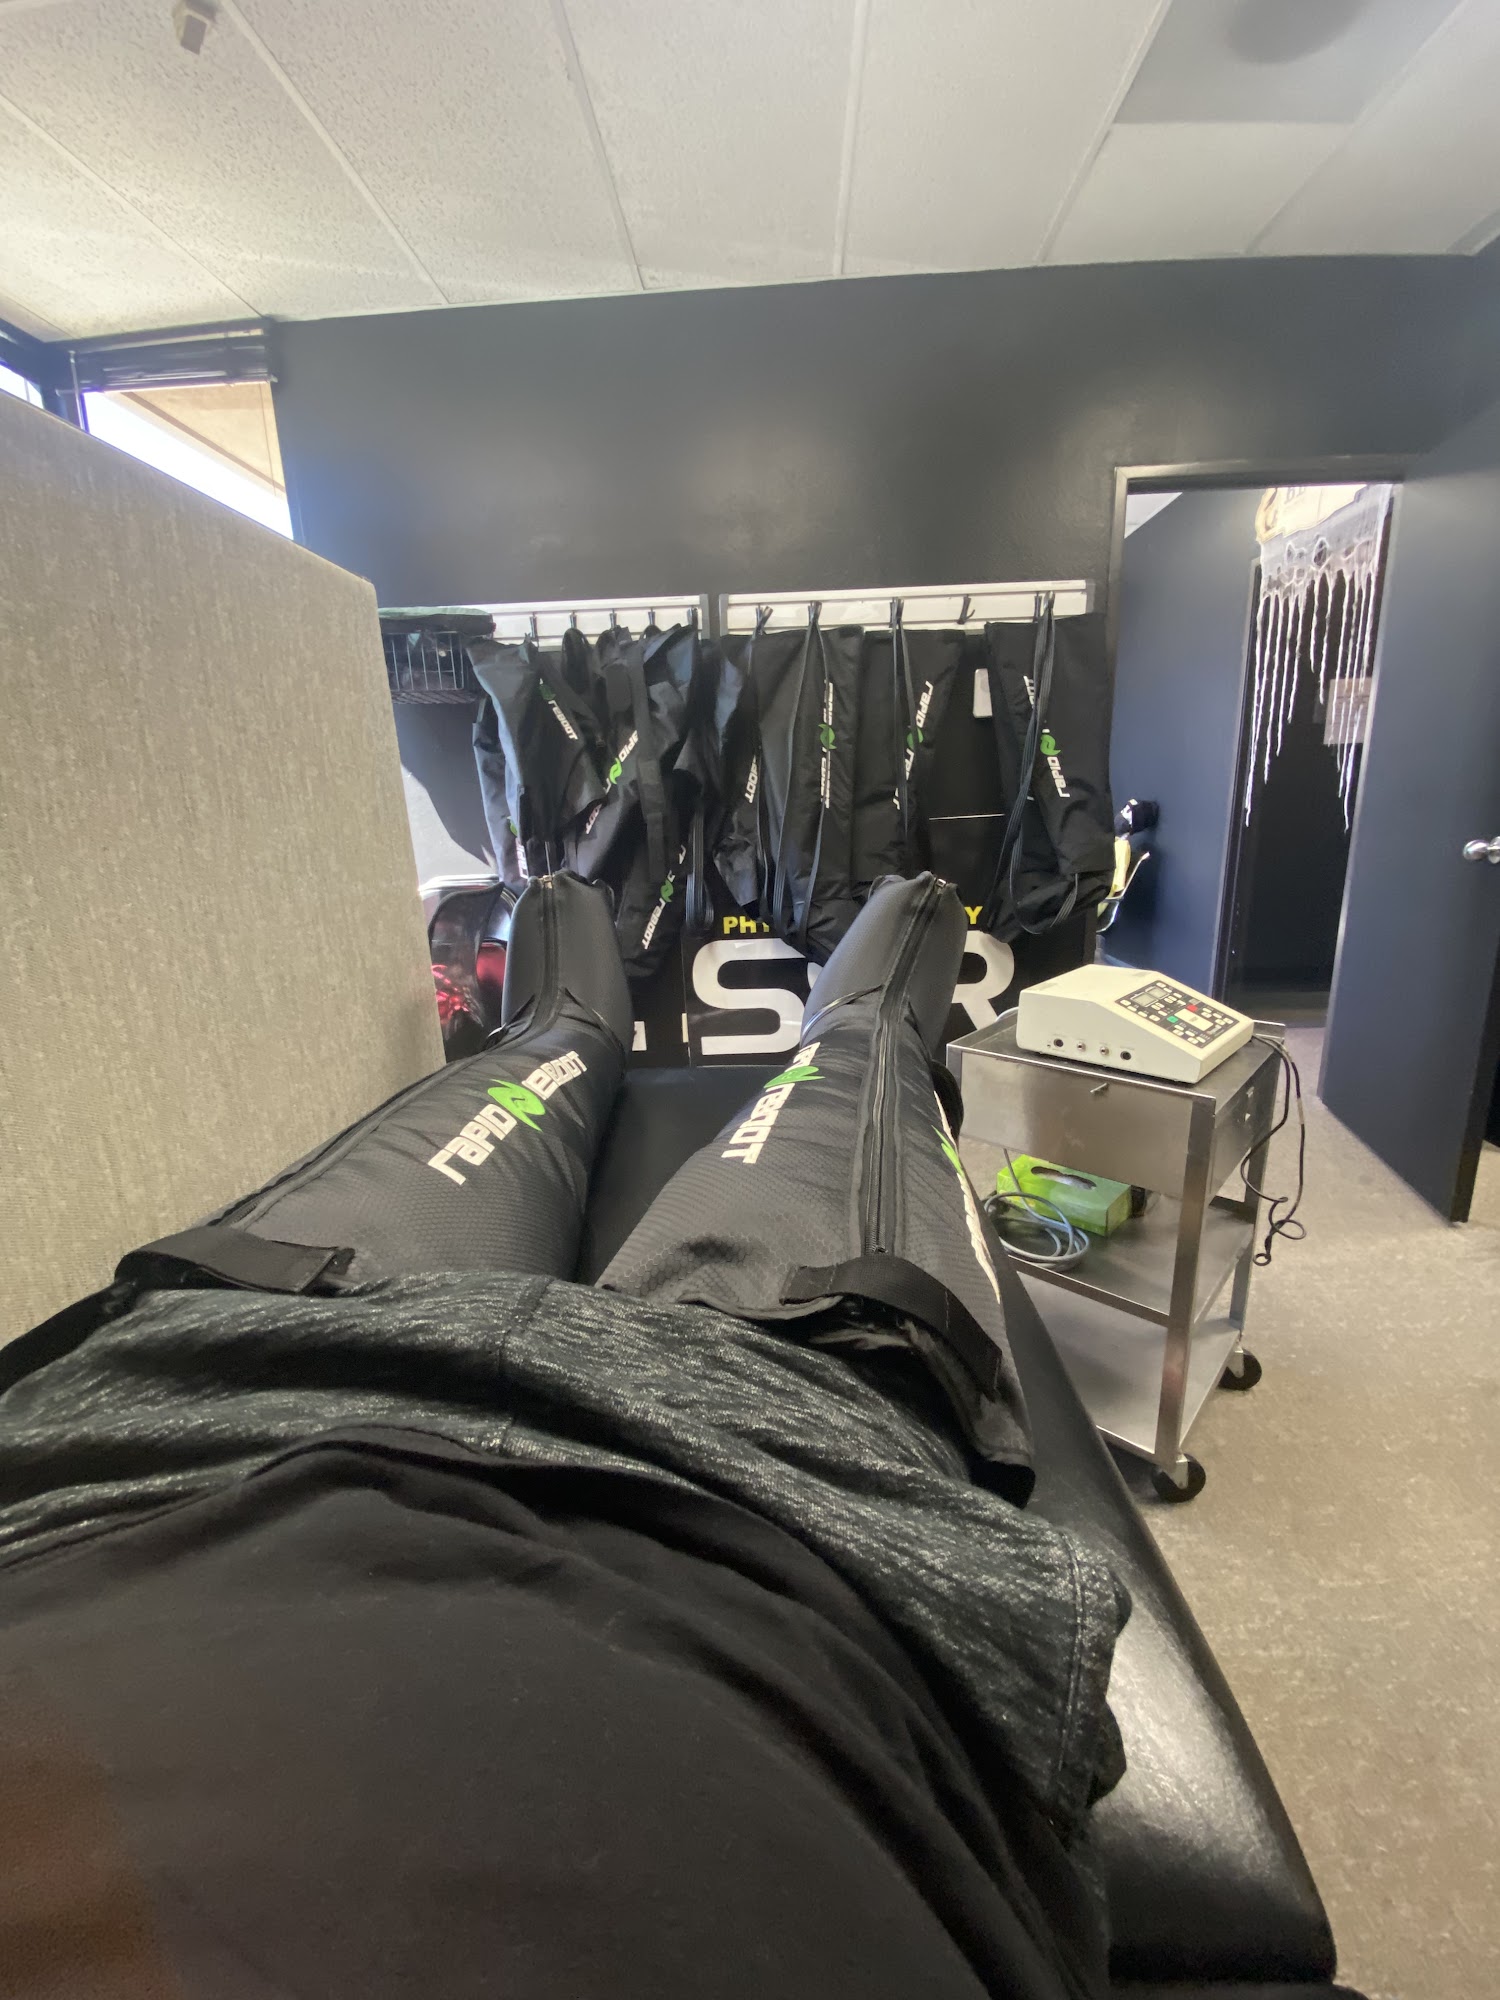 Sports Specific Rehab Physical Therapy